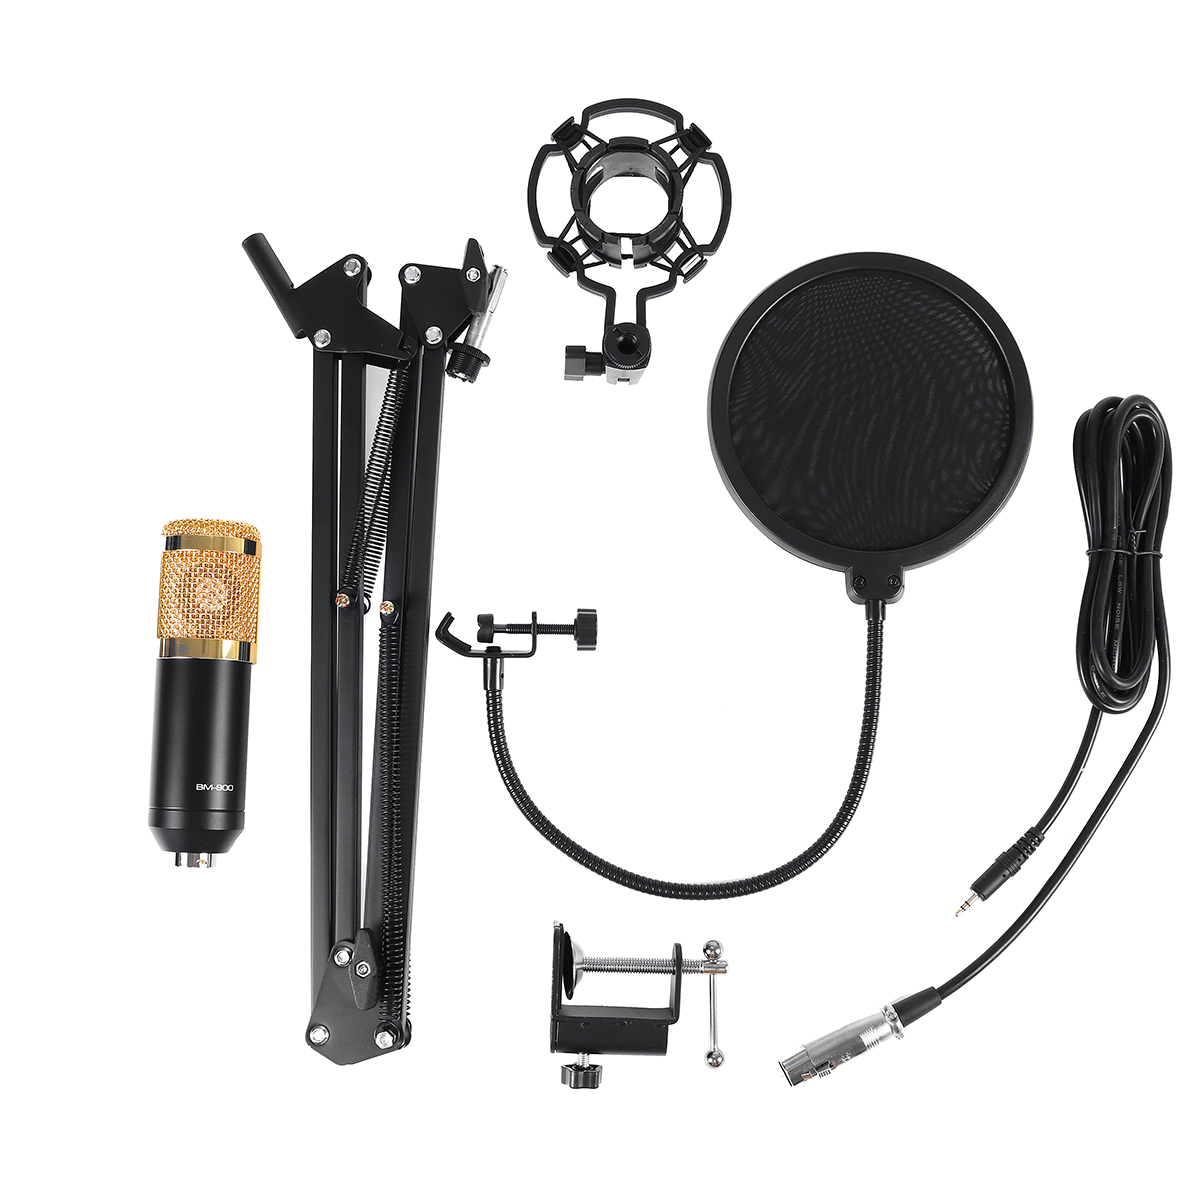 BM-800-Condenser-Microphone-Kit-35mm-Recording-Mic-Tripod-Stand-Set-for-Computer-PC-Karaoke-for-Chat-1736977-14